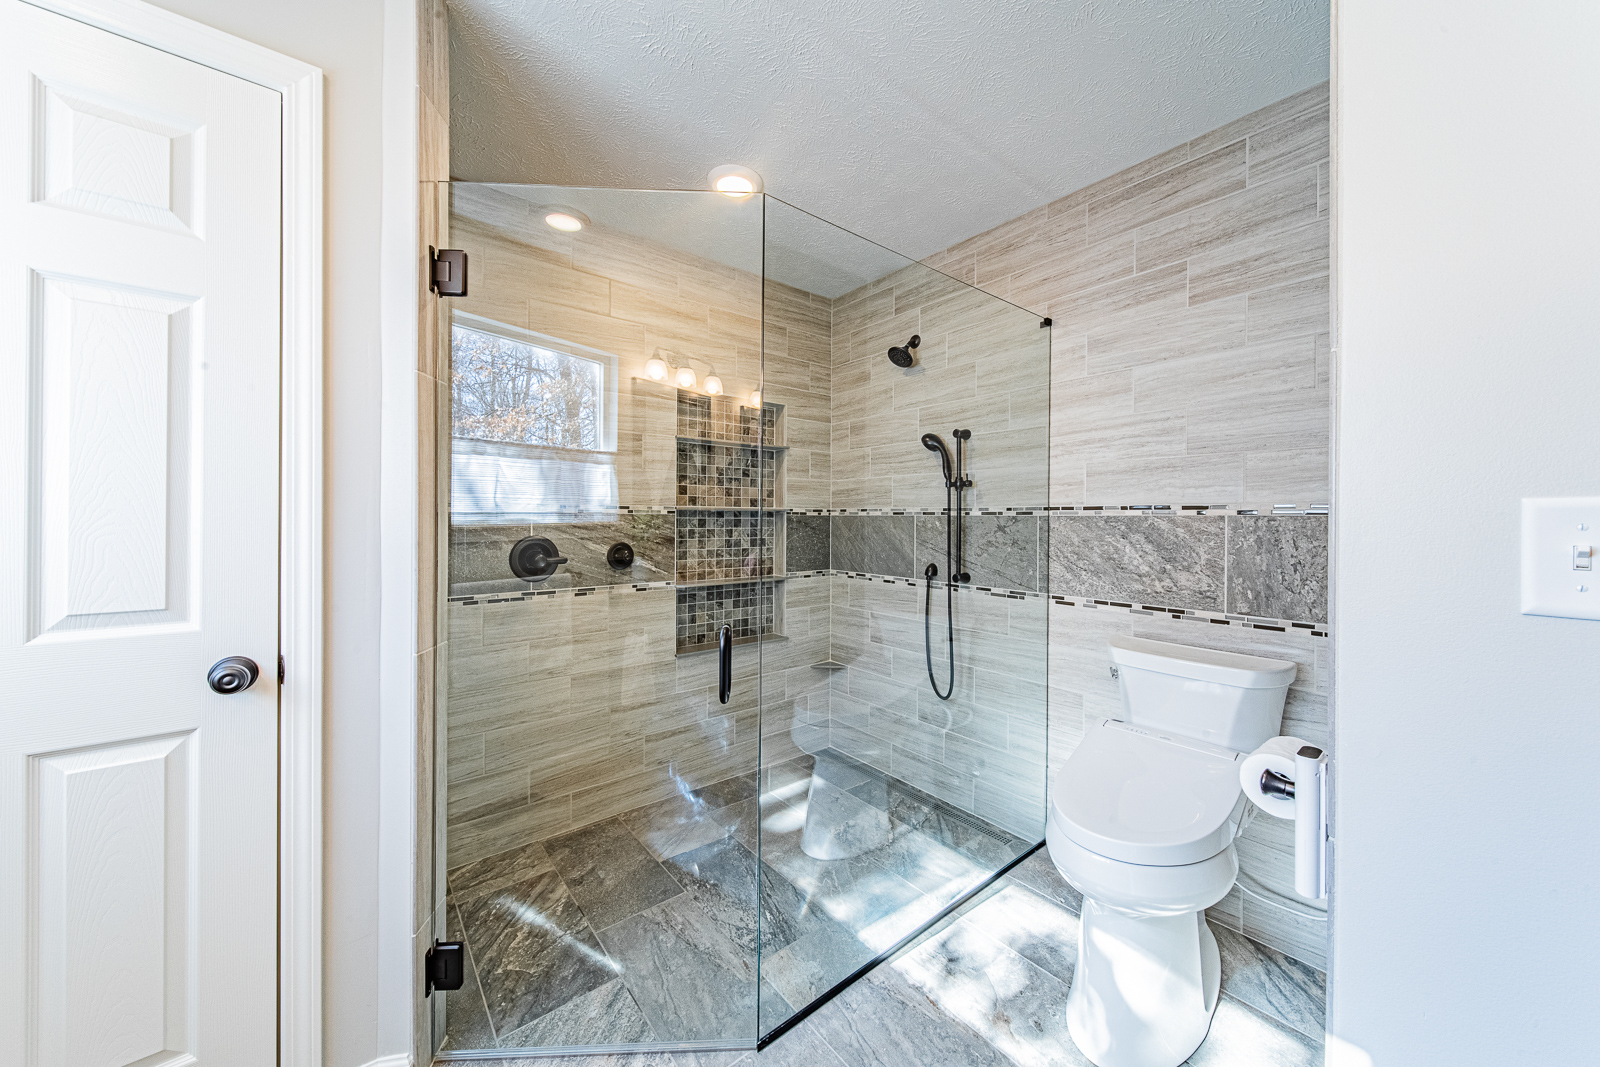 Well-designed shower and toilet area in Lafayette bathroom remodel, optimized for accessibility.